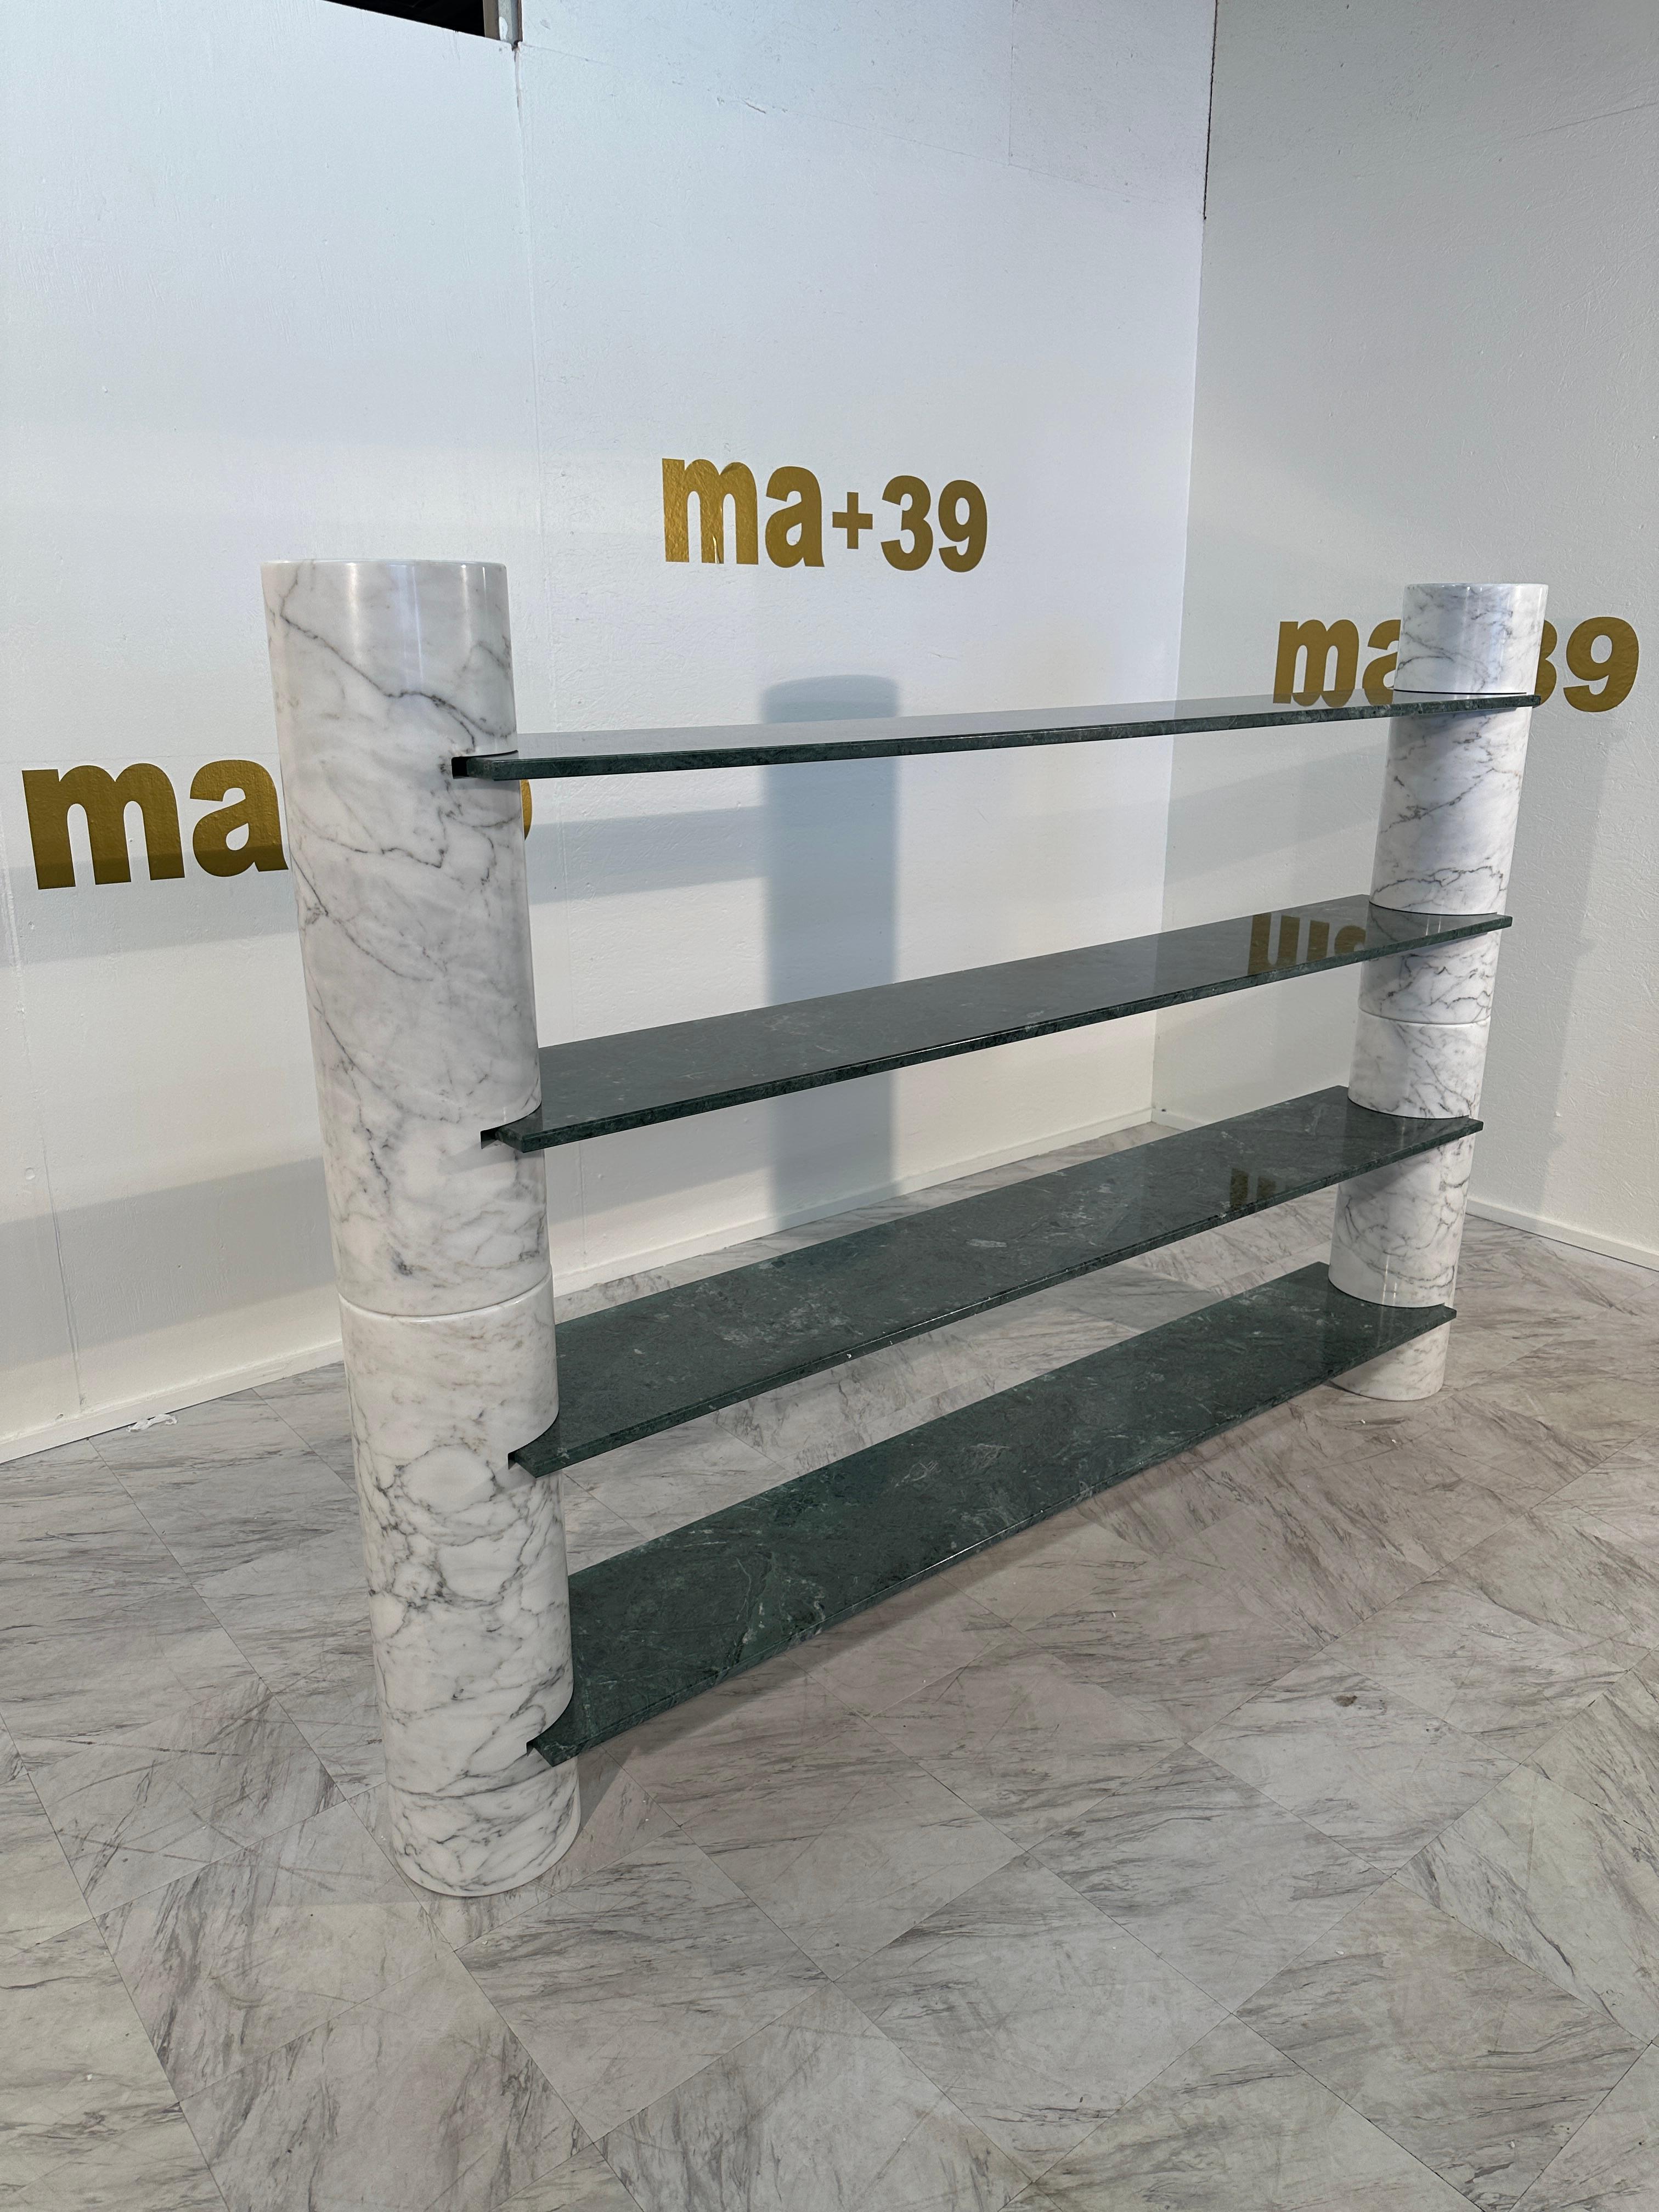 The Angelo Mangiarotti for Skipper 'Loico' Bookcase from the 1970s in Italy is a remarkable piece of furniture. Designed by renowned Italian architect Angelo Mangiarotti, this bookcase features a distinctive blend of white and green marble,